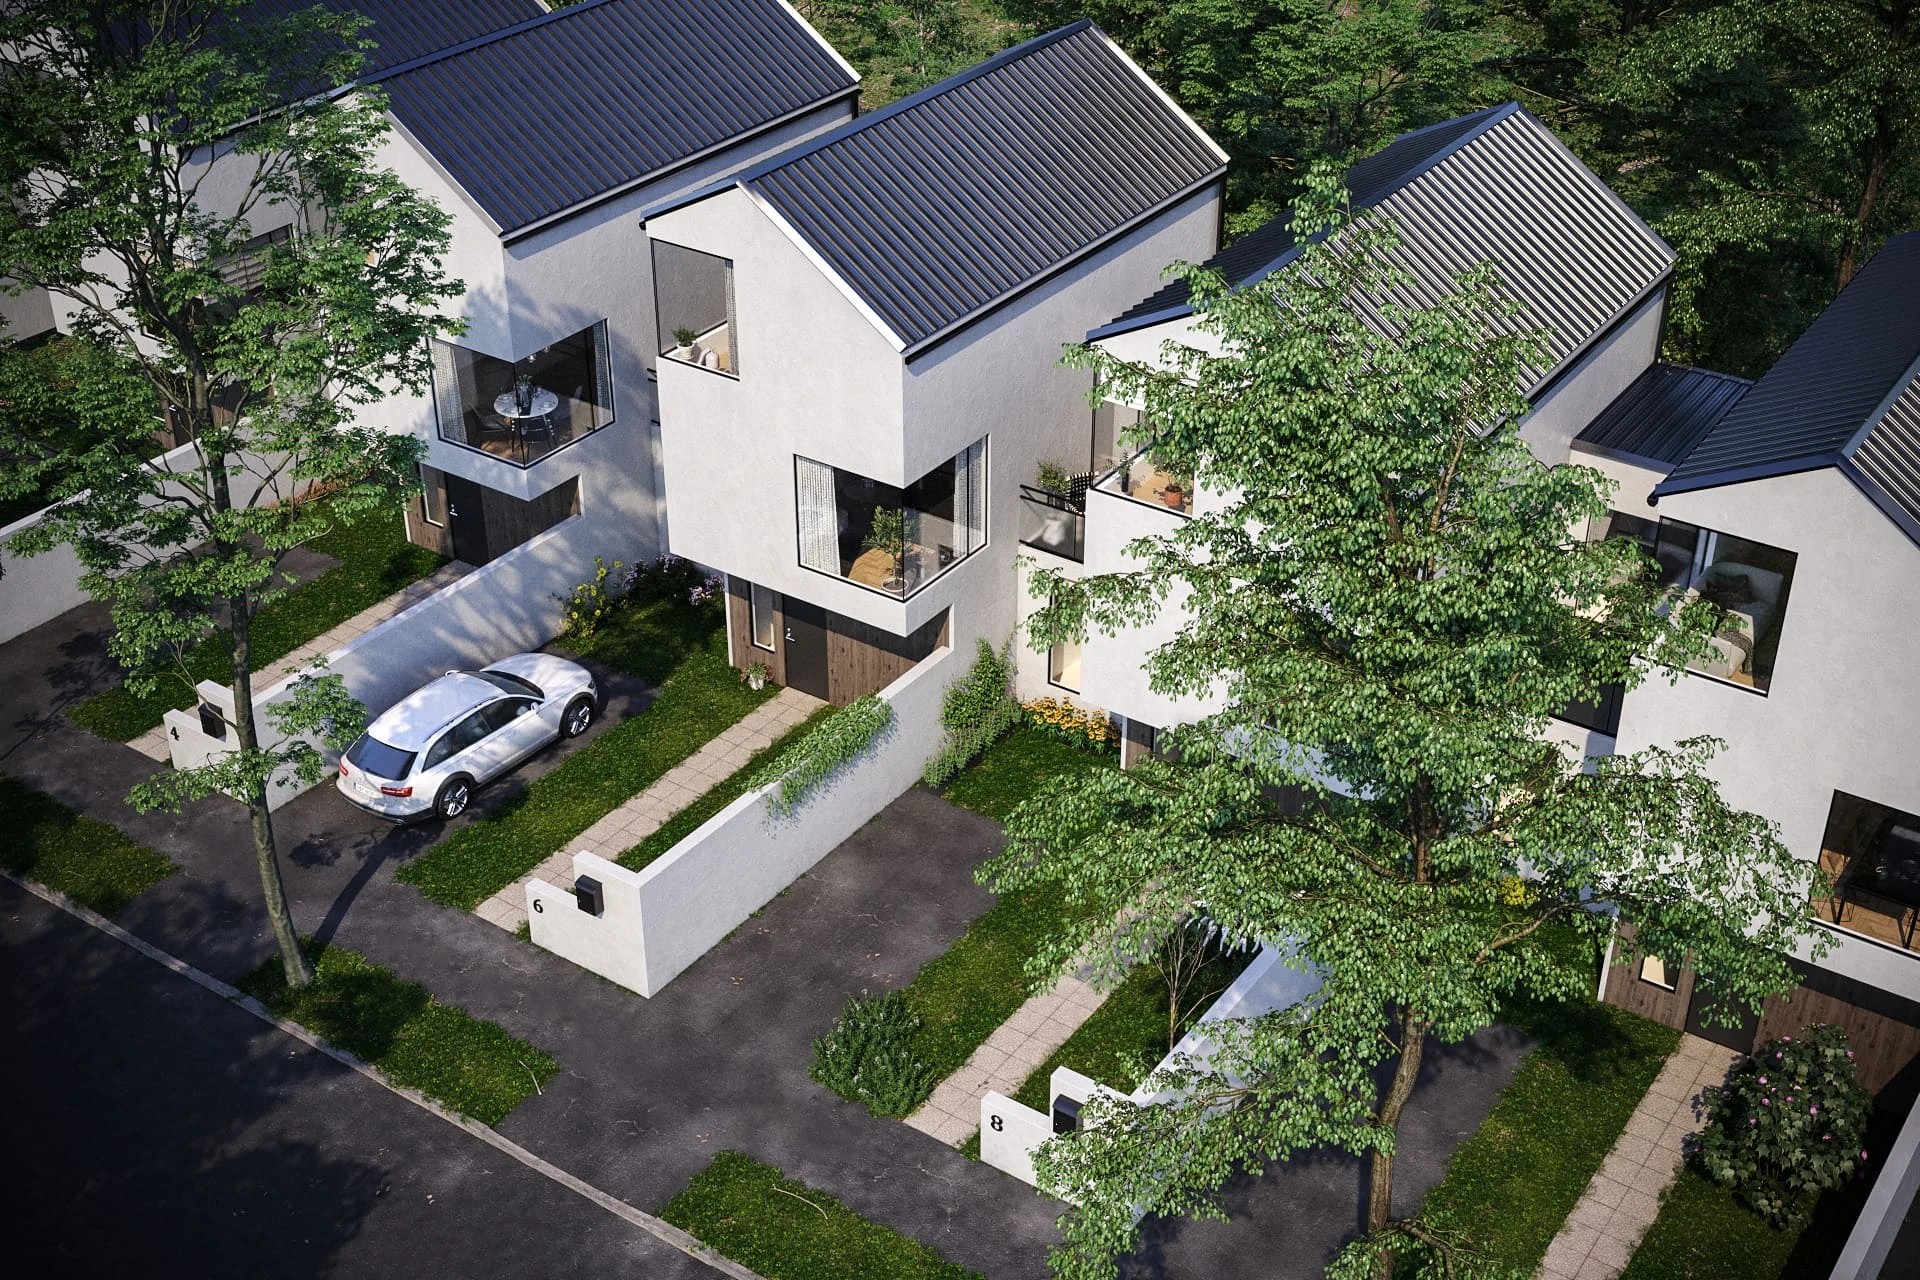 Top view rendering of a modern townhouse